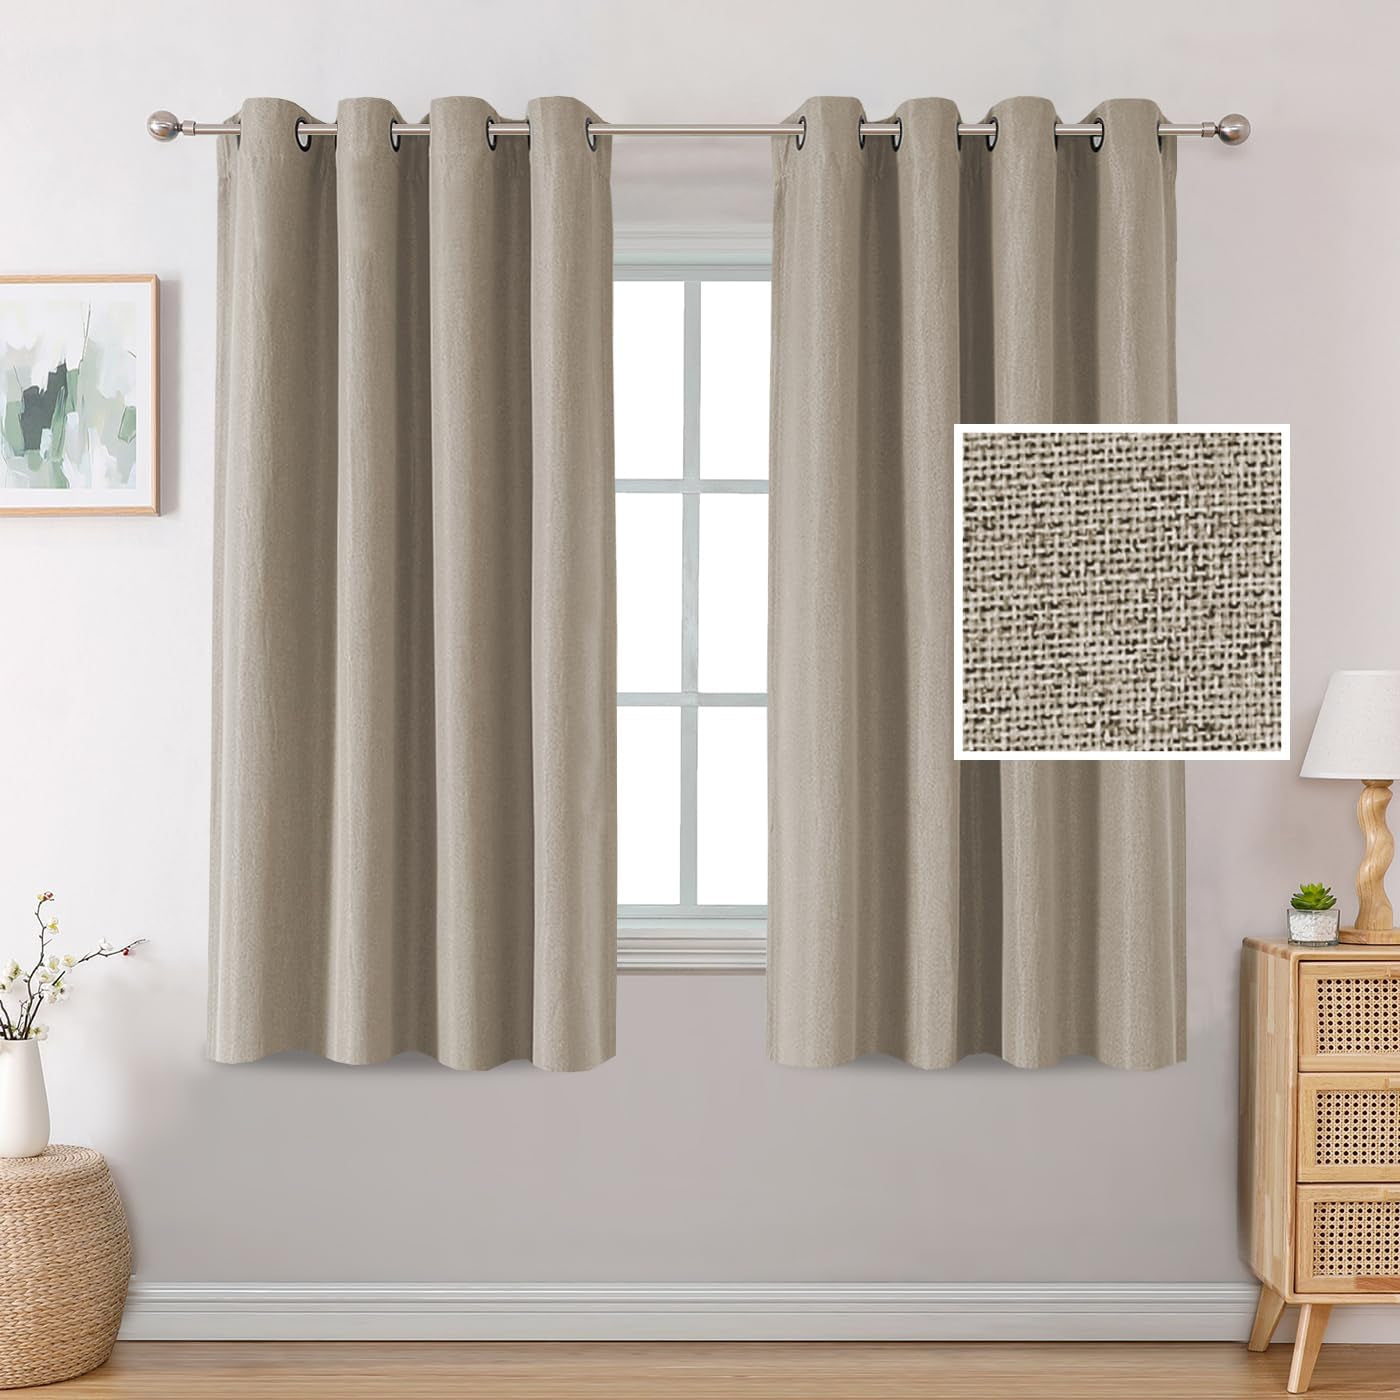 H.VERSAILTEX Linen Blackout Curtains 84 Inches Long Thermal Insulated Room Darkening Linen Curtains for Bedroom Textured Burlap Grommet Window Curtains for Living Room, Bluestone and Taupe, 2 Panels  H.VERSAILTEX Light Taupe 52"W X 54"L 